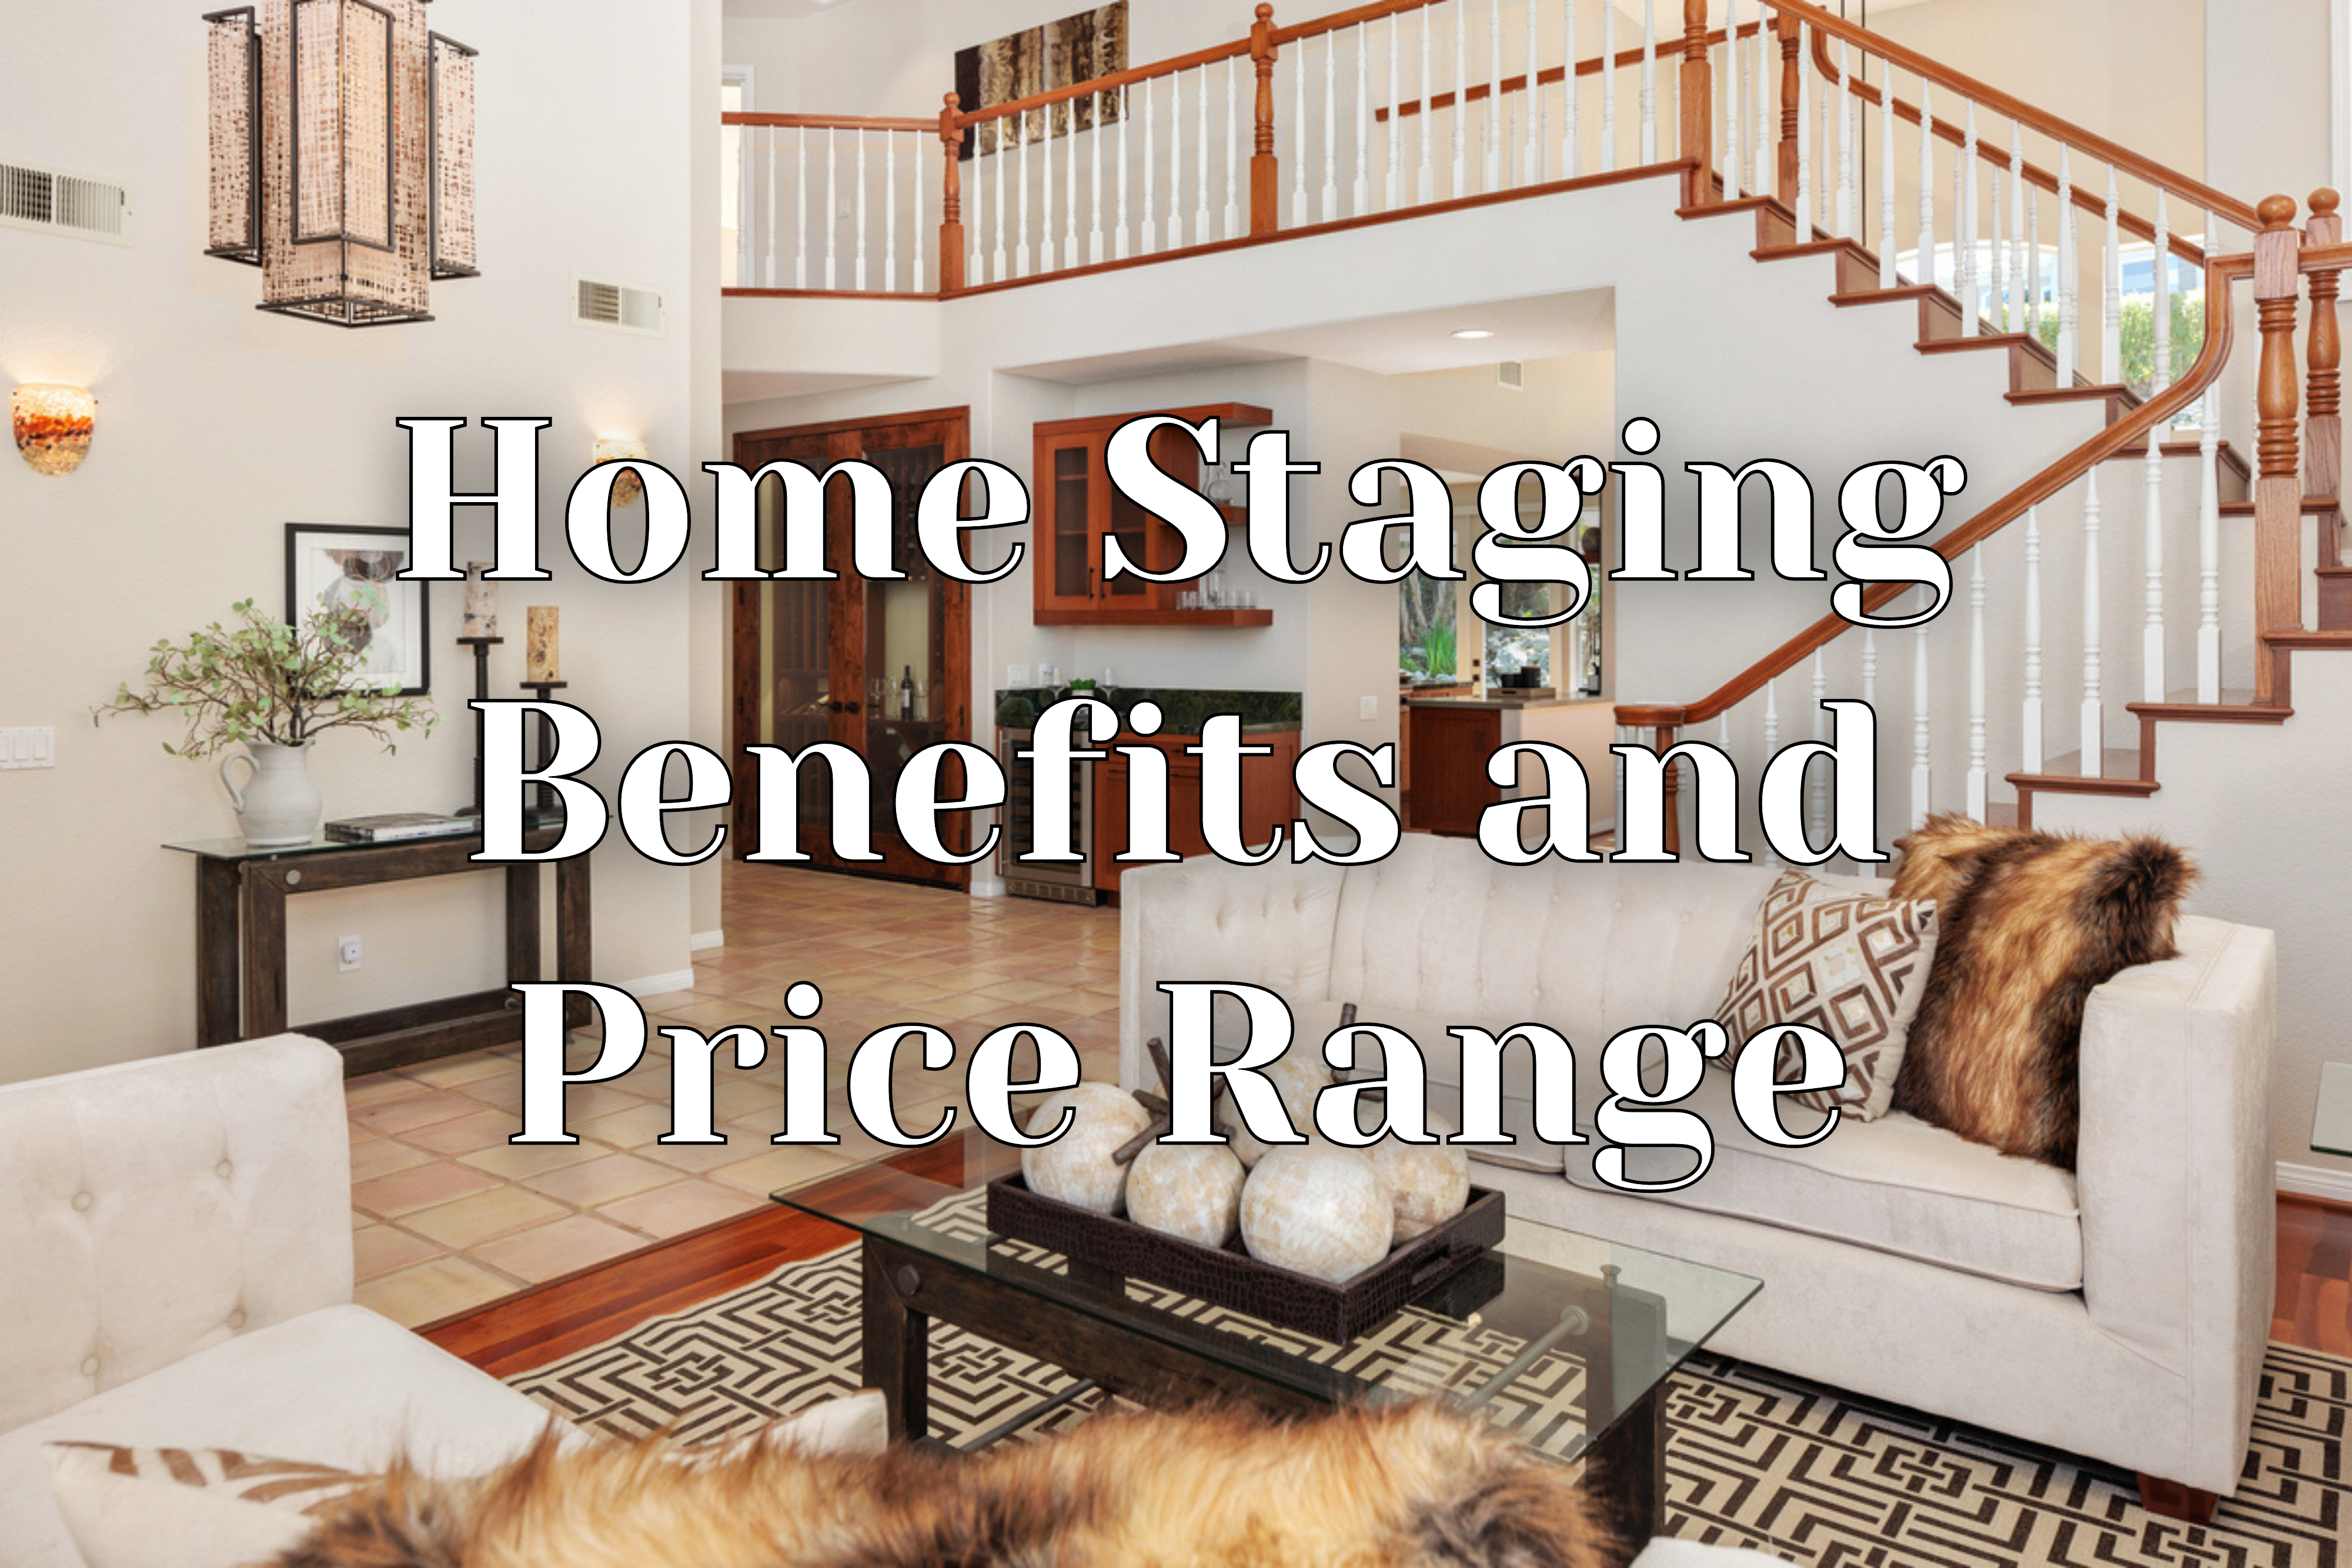 Home Staging Benefits and Price Range